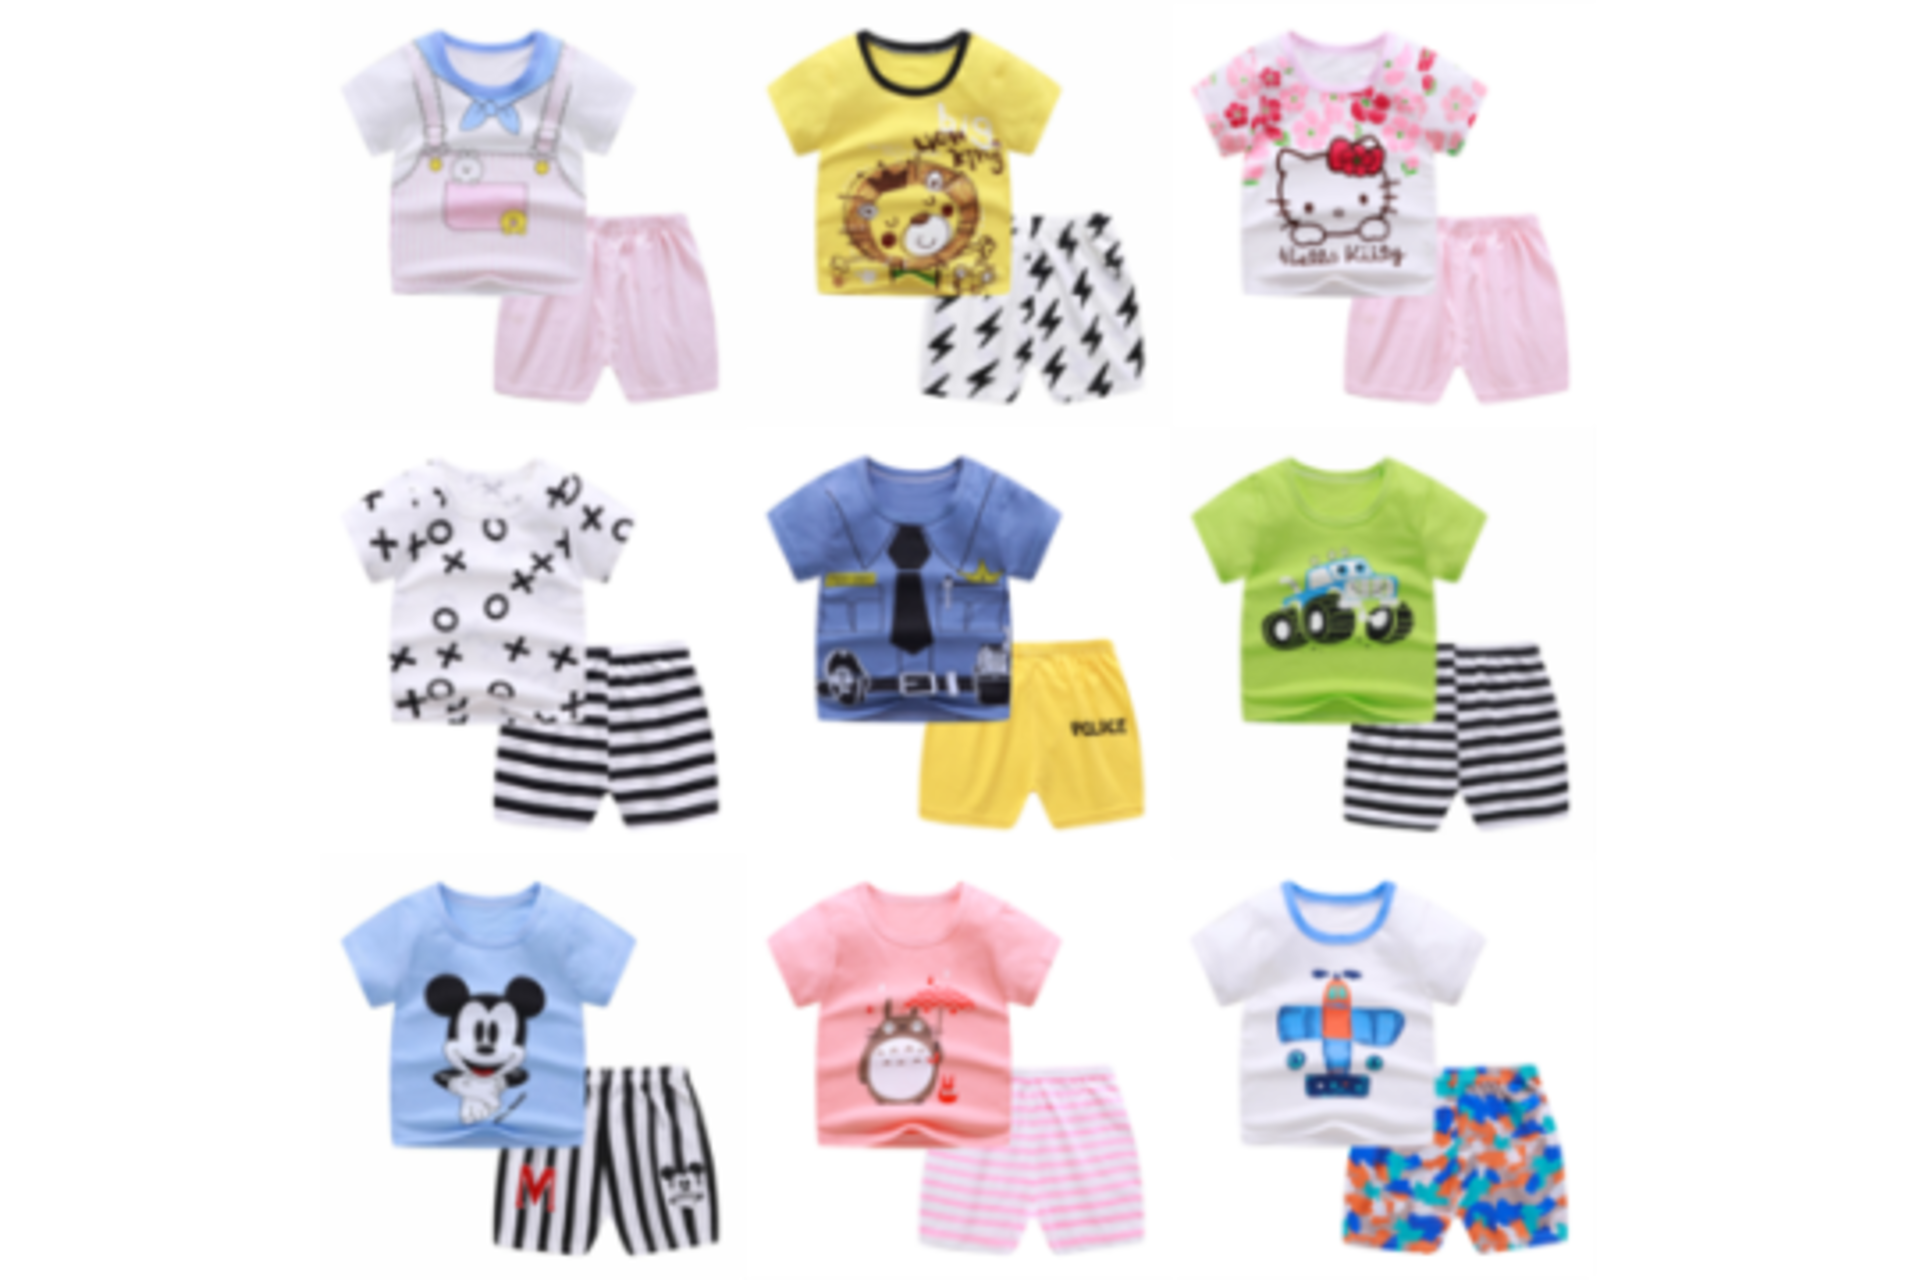 20 X BRAND NEW BABY PJ SETS IN VARIOUS STYLES AND SIZES S1